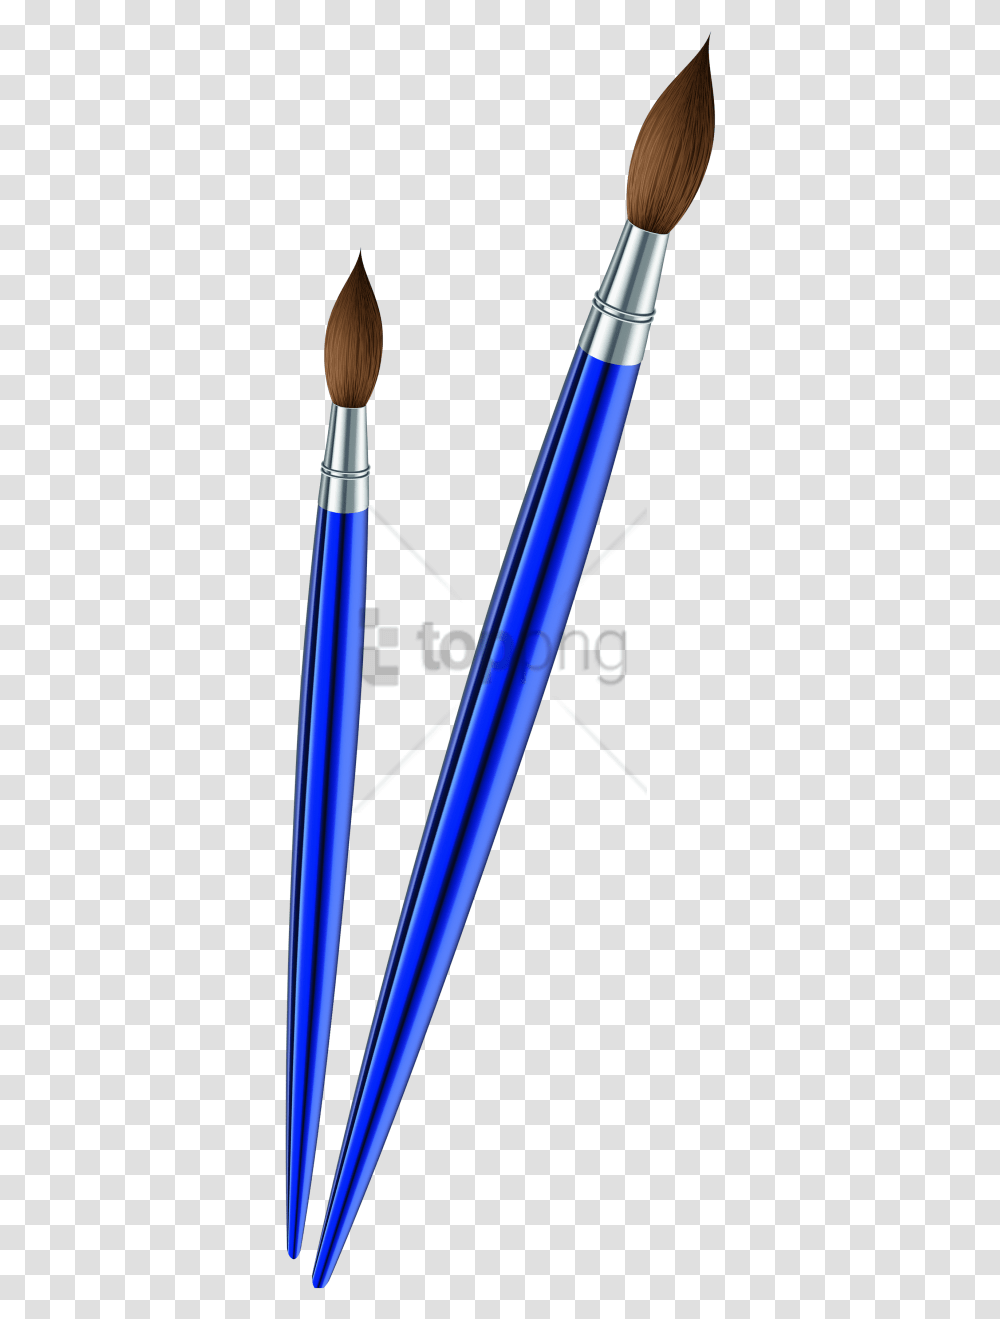 Free Paint Brush Clip Art Image With Paint Brush Background, Arrow, Pen, Toothbrush Transparent Png